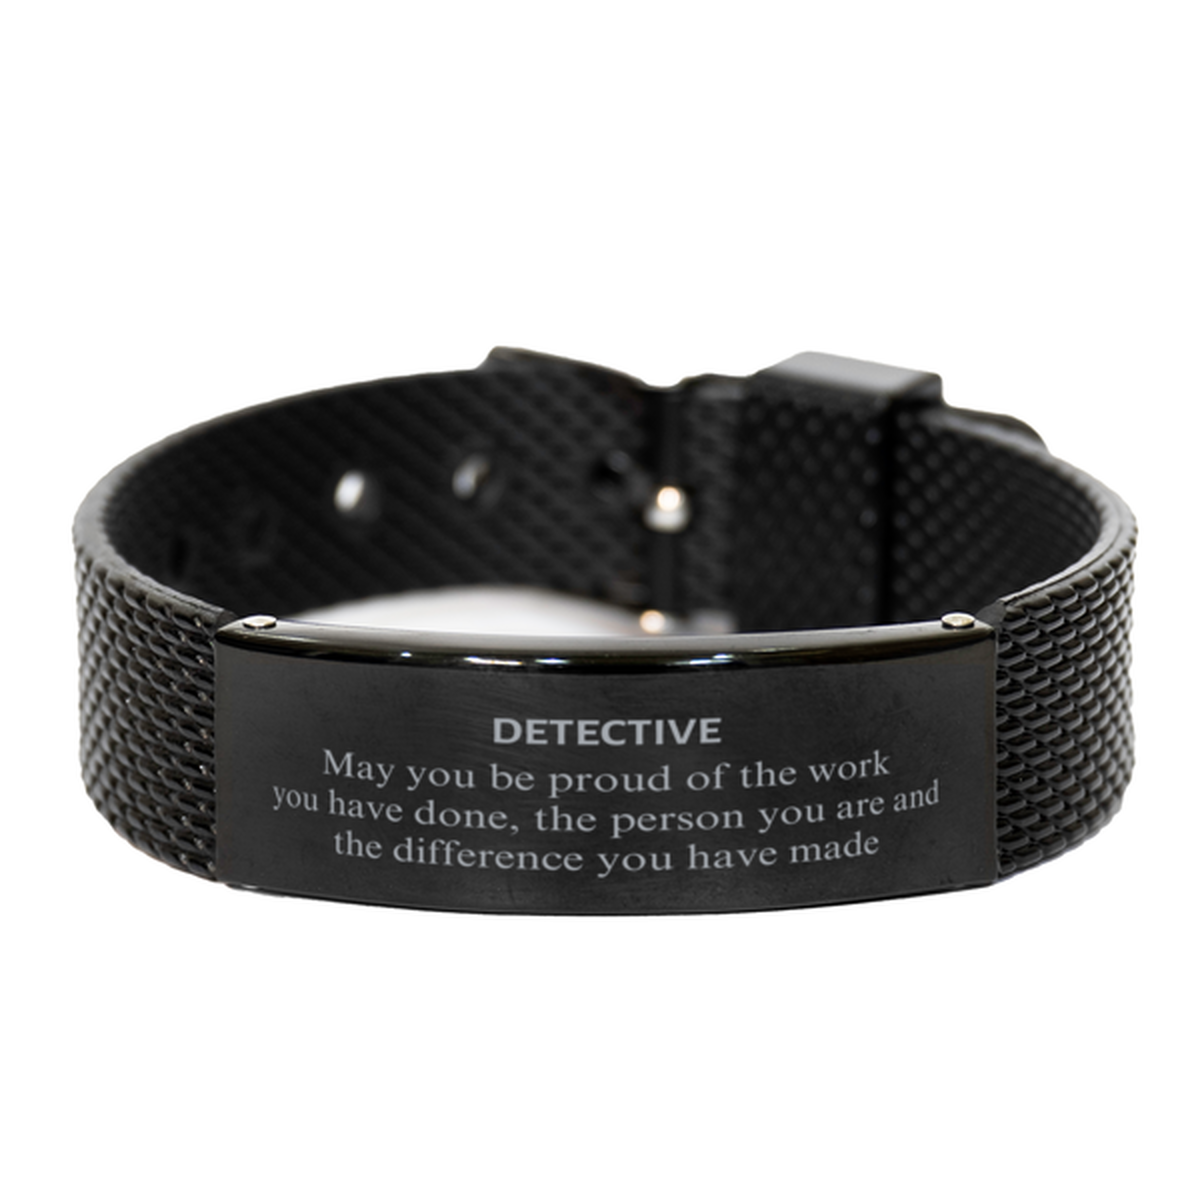 Detective May you be proud of the work you have done, Retirement Detective Black Shark Mesh Bracelet for Colleague Appreciation Gifts Amazing for Detective